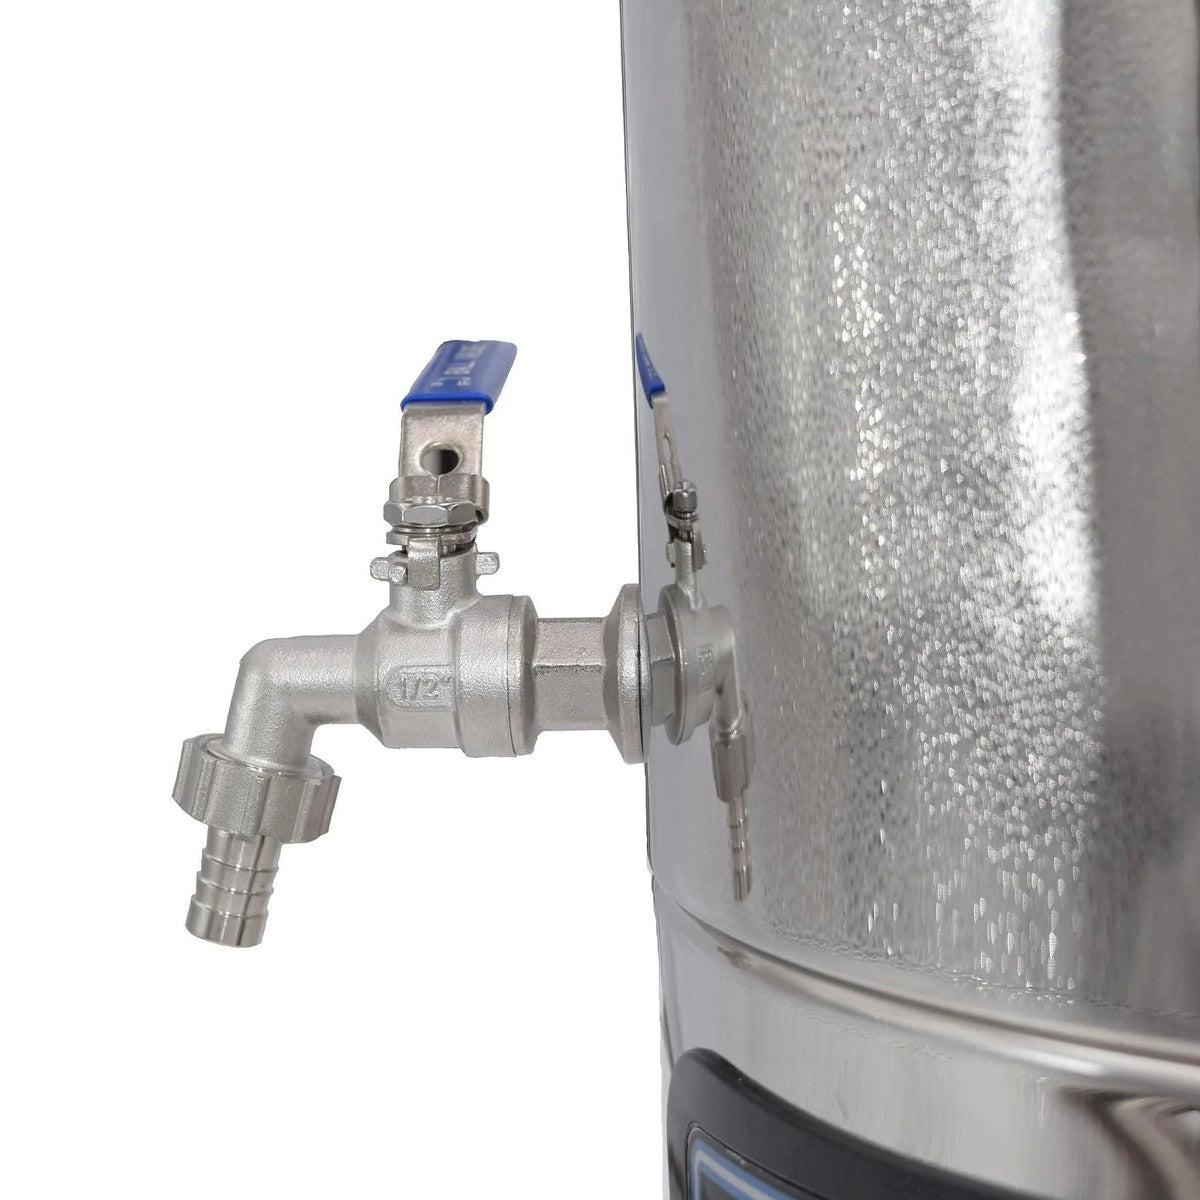 nozzle home brewing system